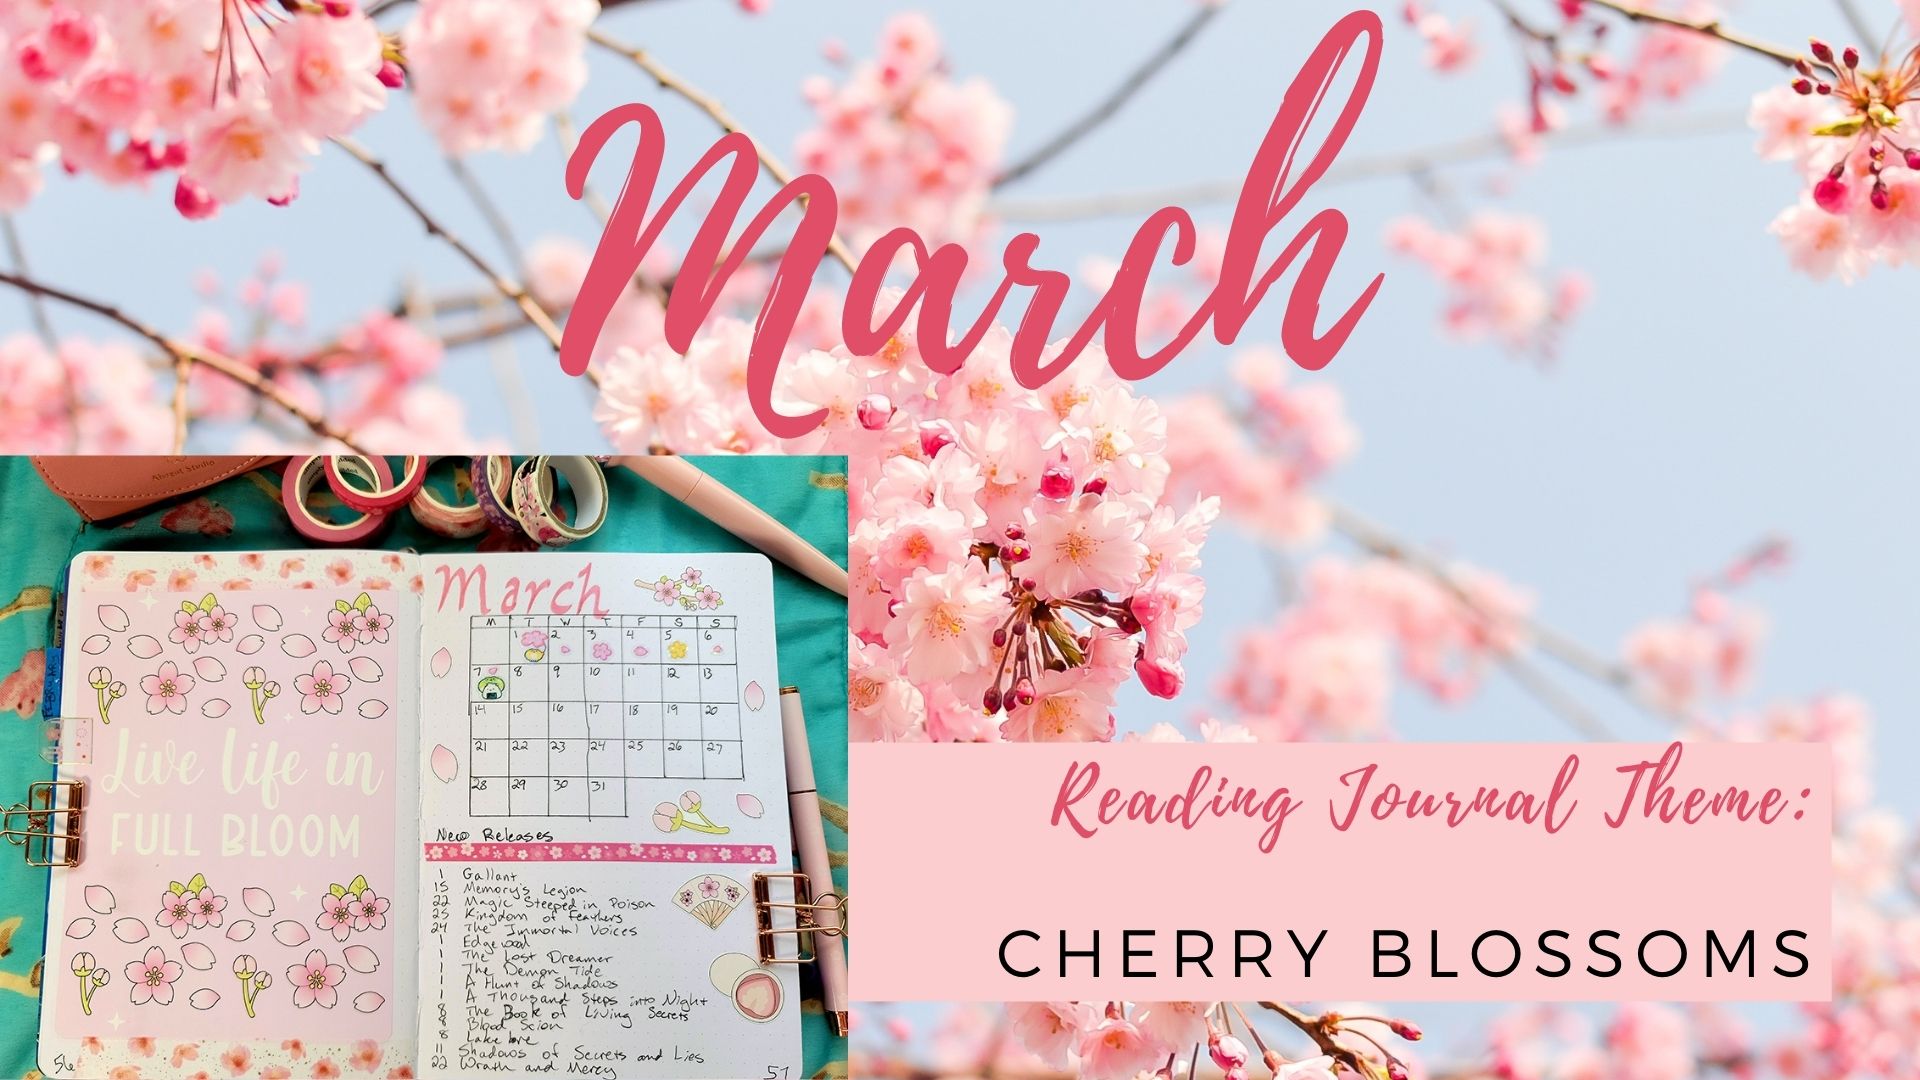 You are currently viewing March Reading Journal: Cherry Blossoms Theme